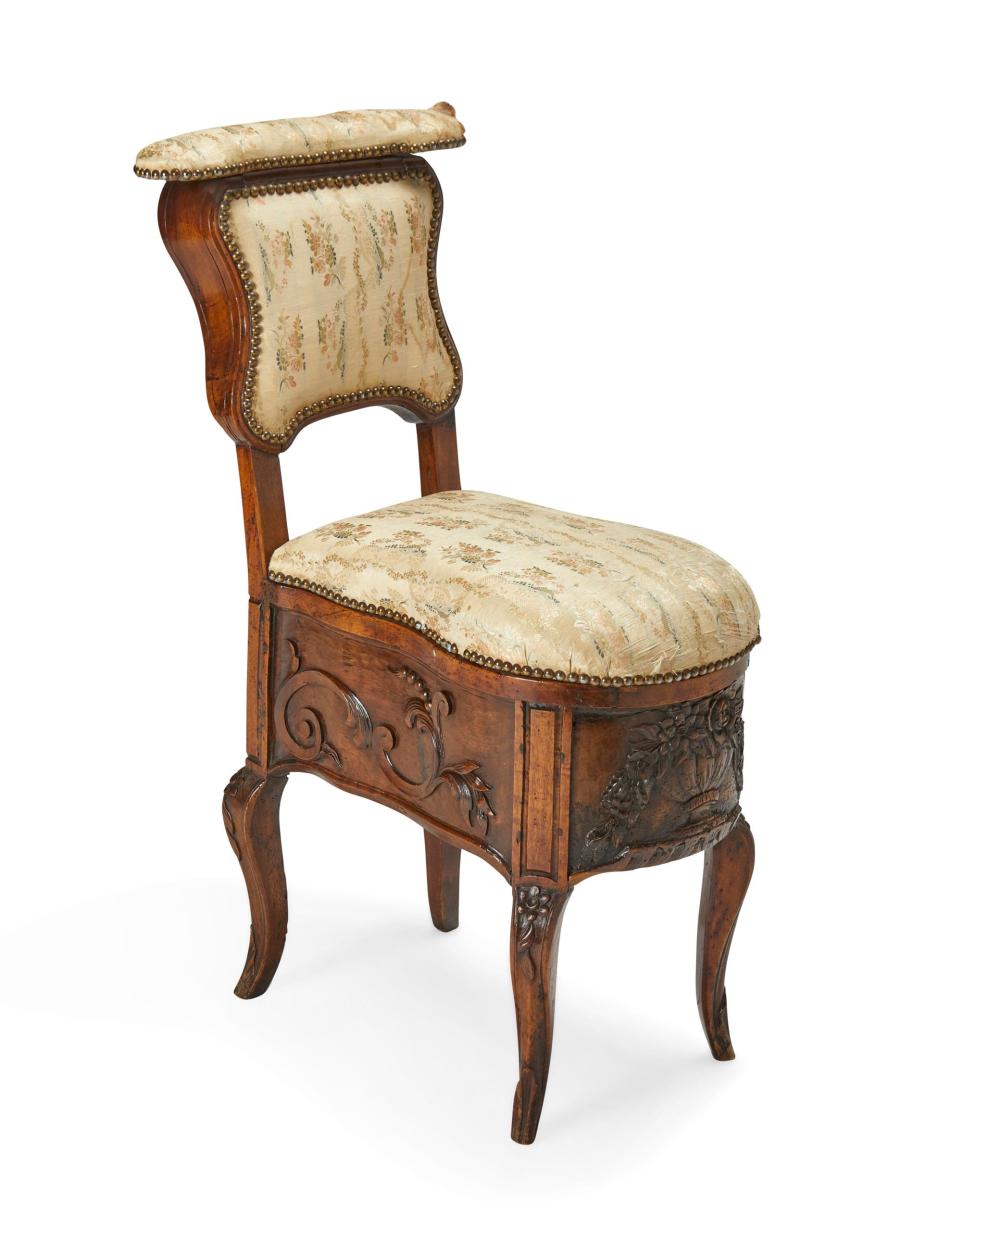 A FRENCH CARVED WOOD COMMODE CHAIRA